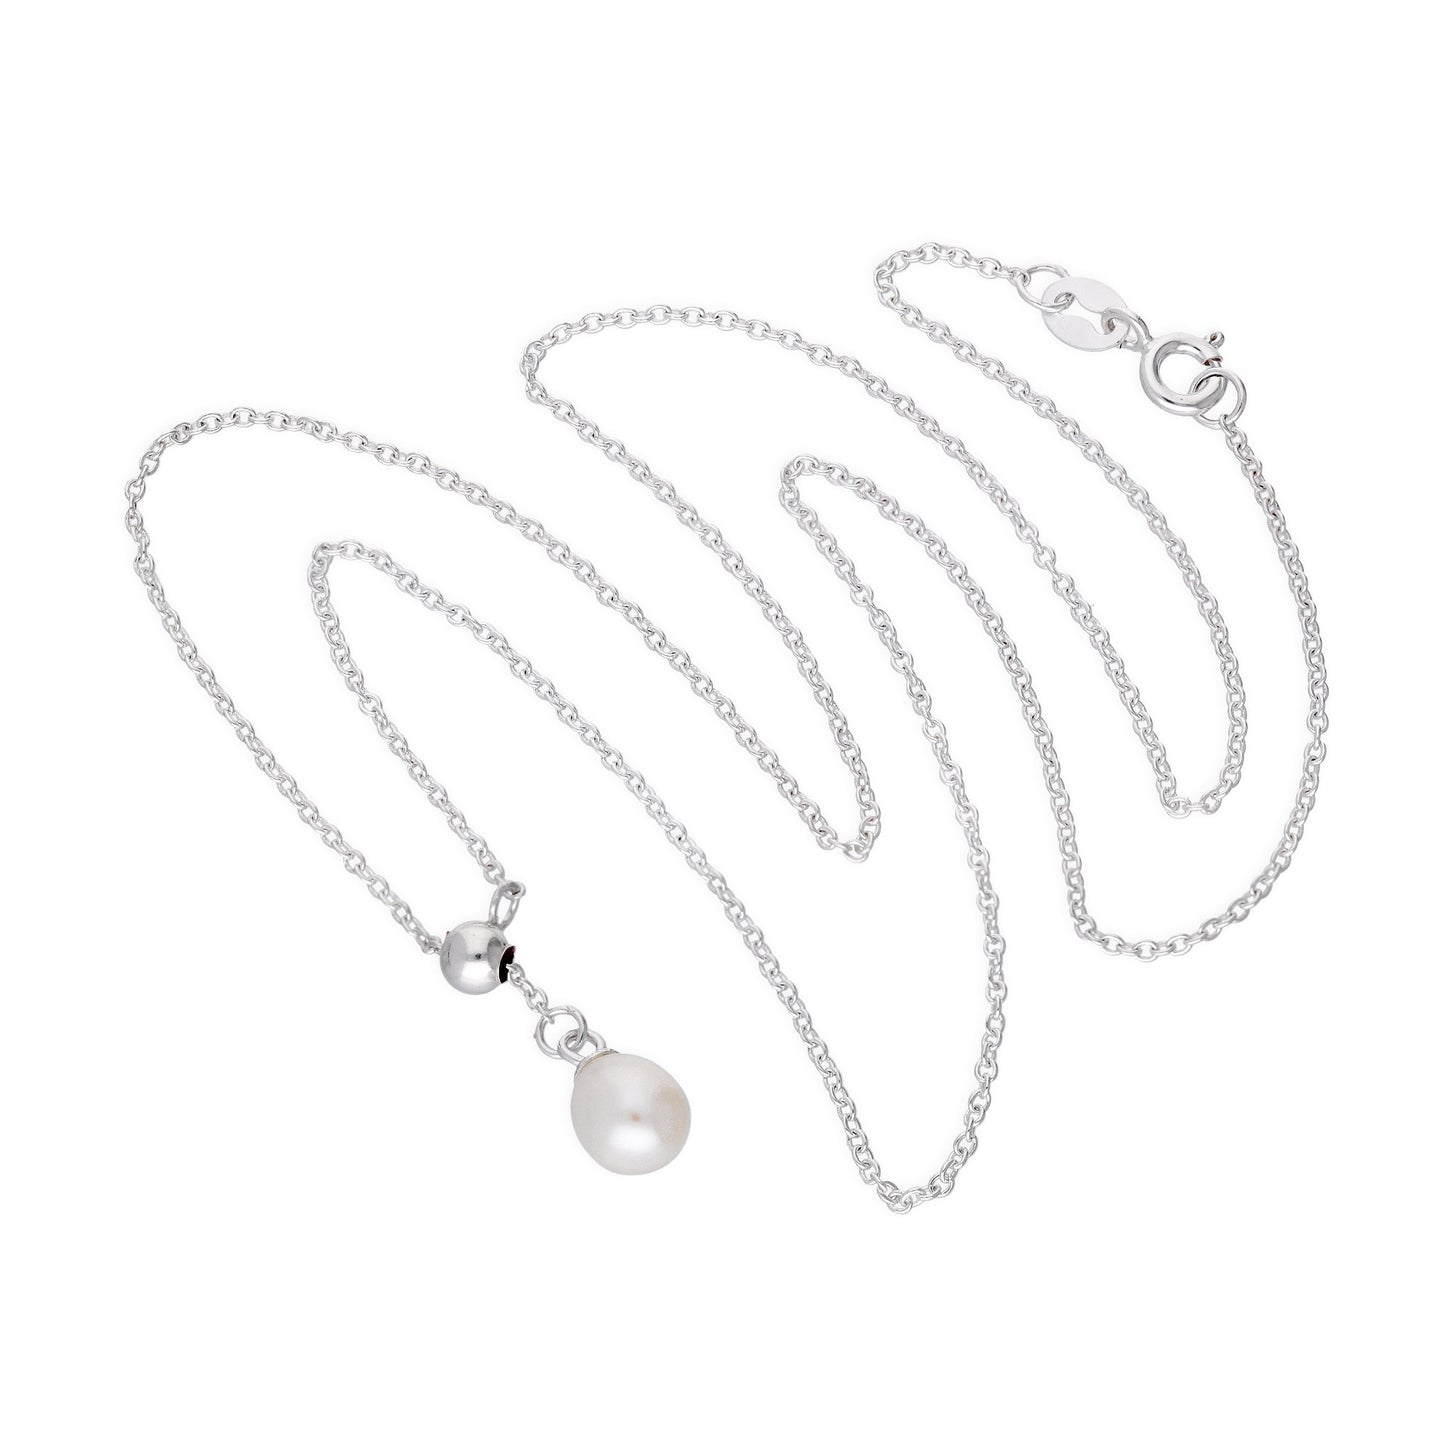 Sterling Silver Adjustable Single Pearl Drop Necklace Up to 18 Inches